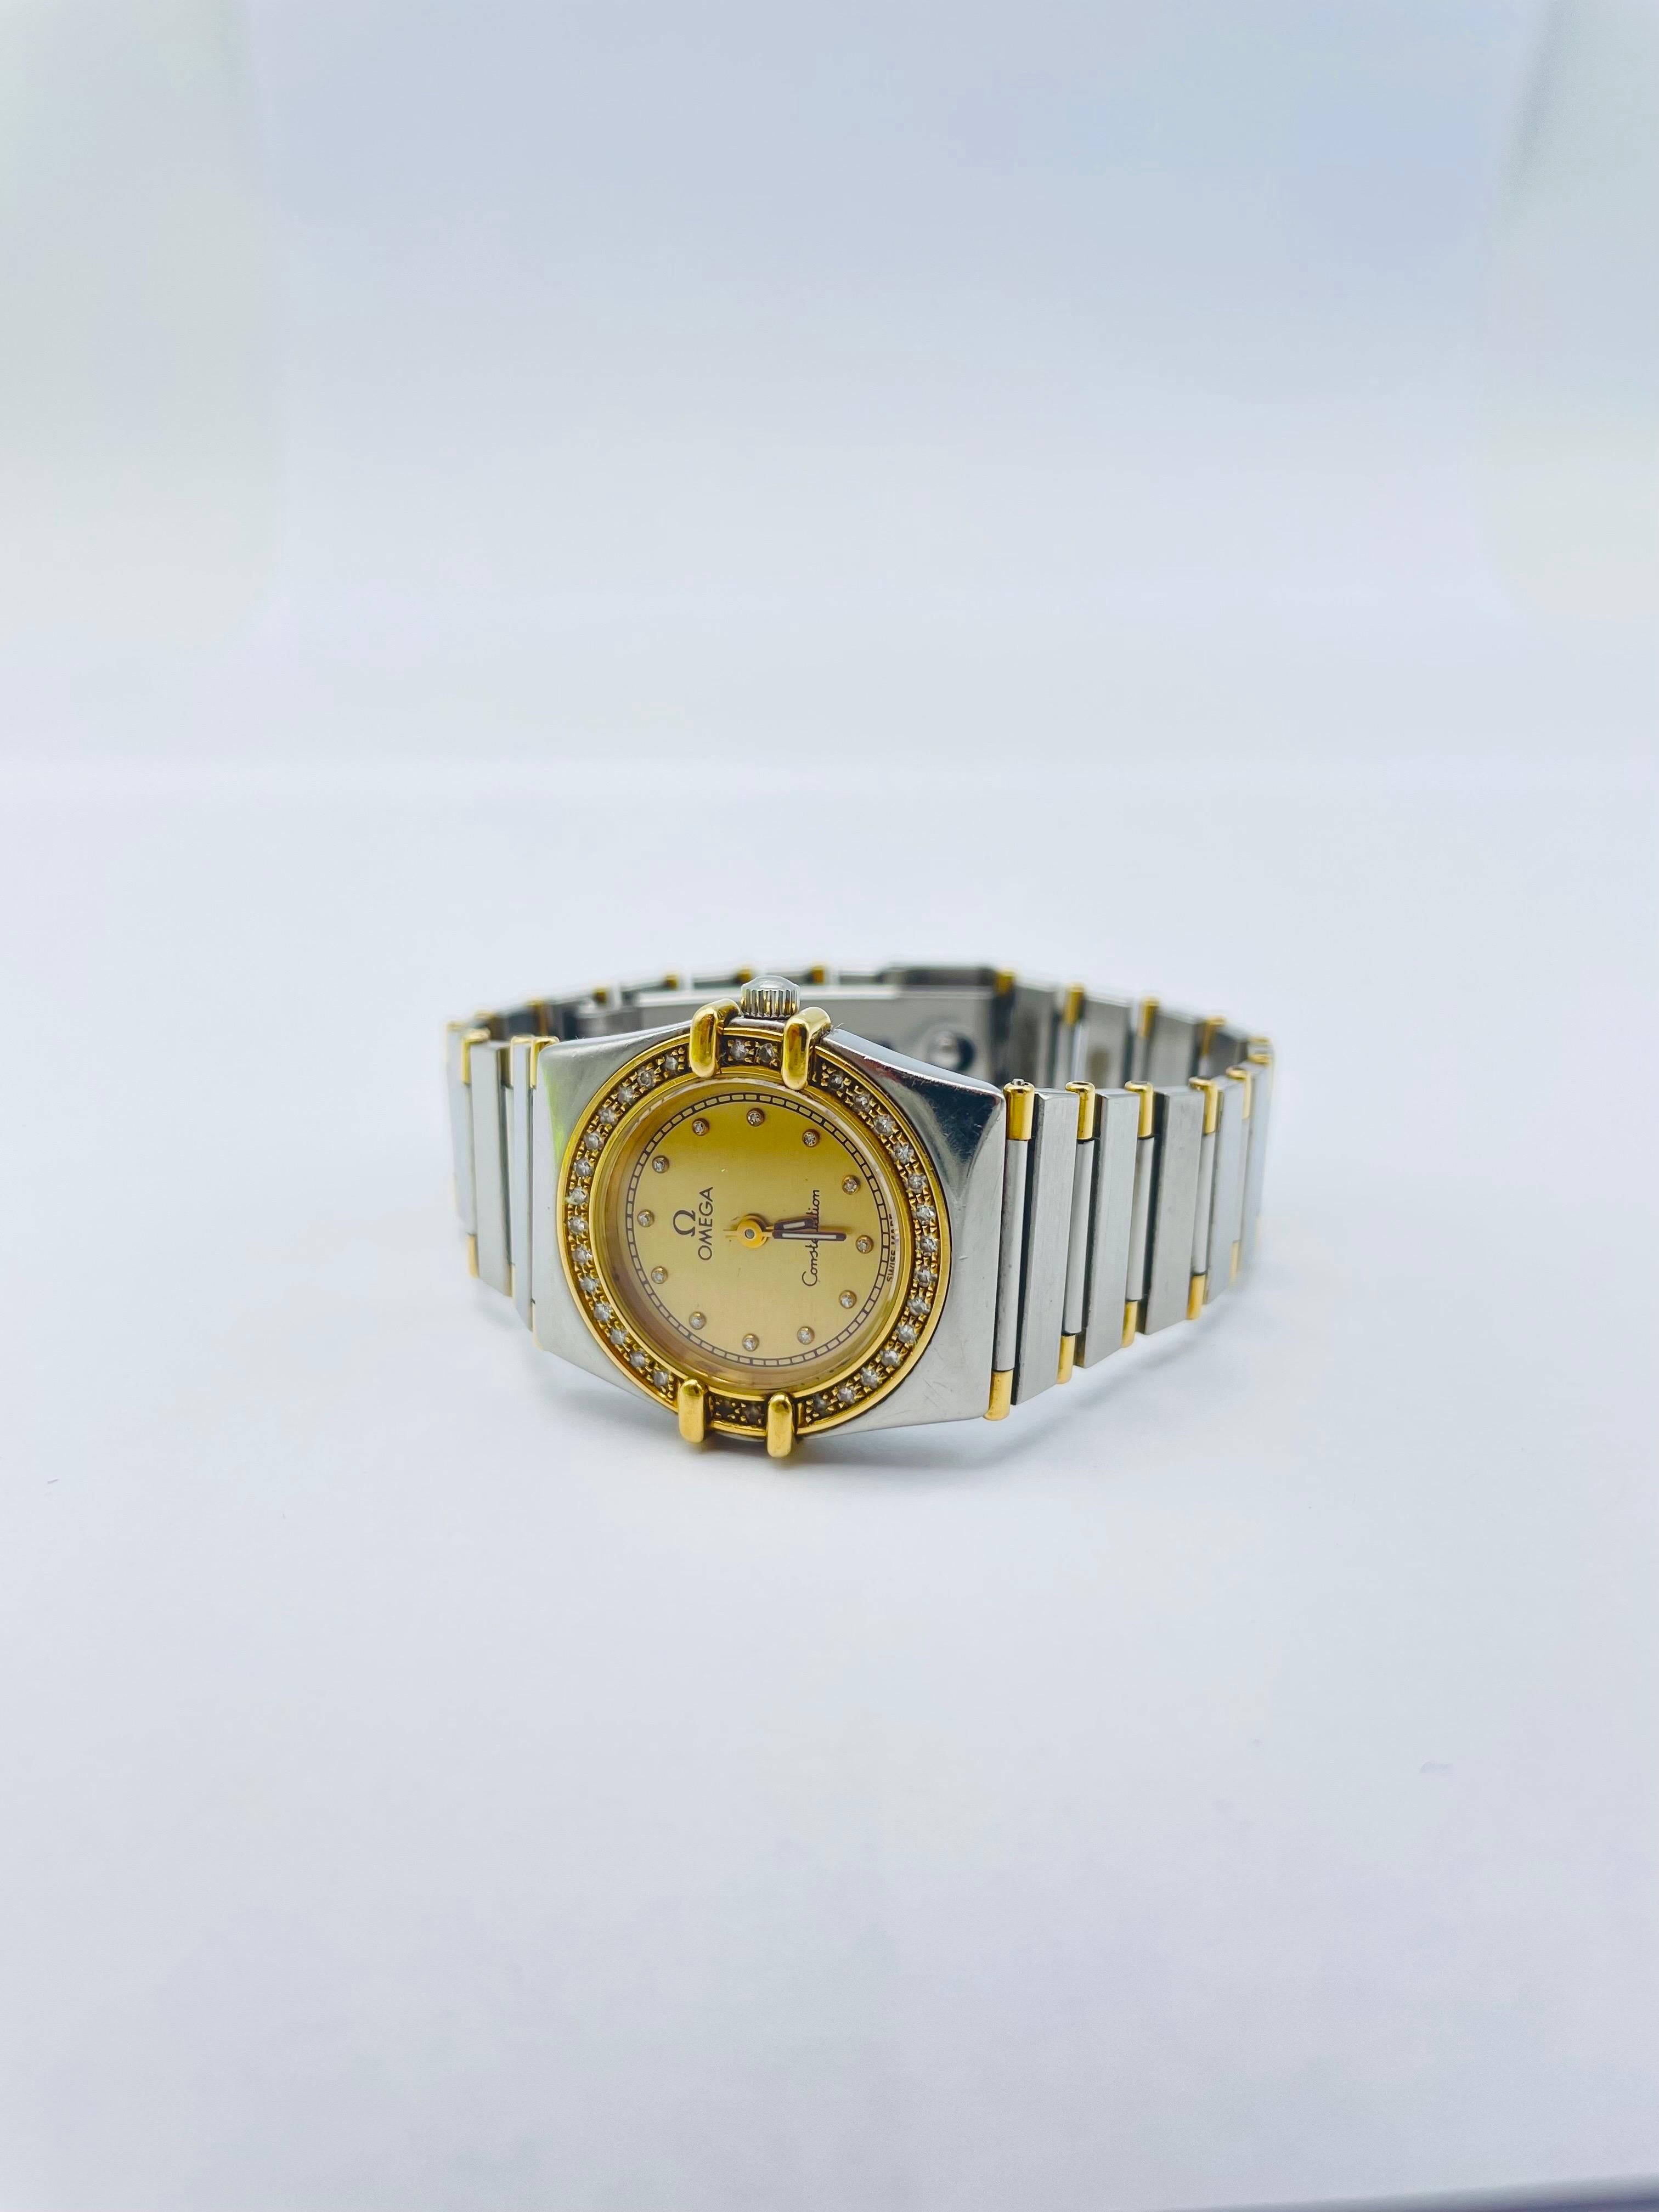 Indulge in luxury with this Omega Constellation Lady Ladies Watch, an exquisite timepiece crafted to perfection. This stunning watch boasts a diamond bezel set in a stainless steel and yellow gold matted case, creating a sophisticated and elegant